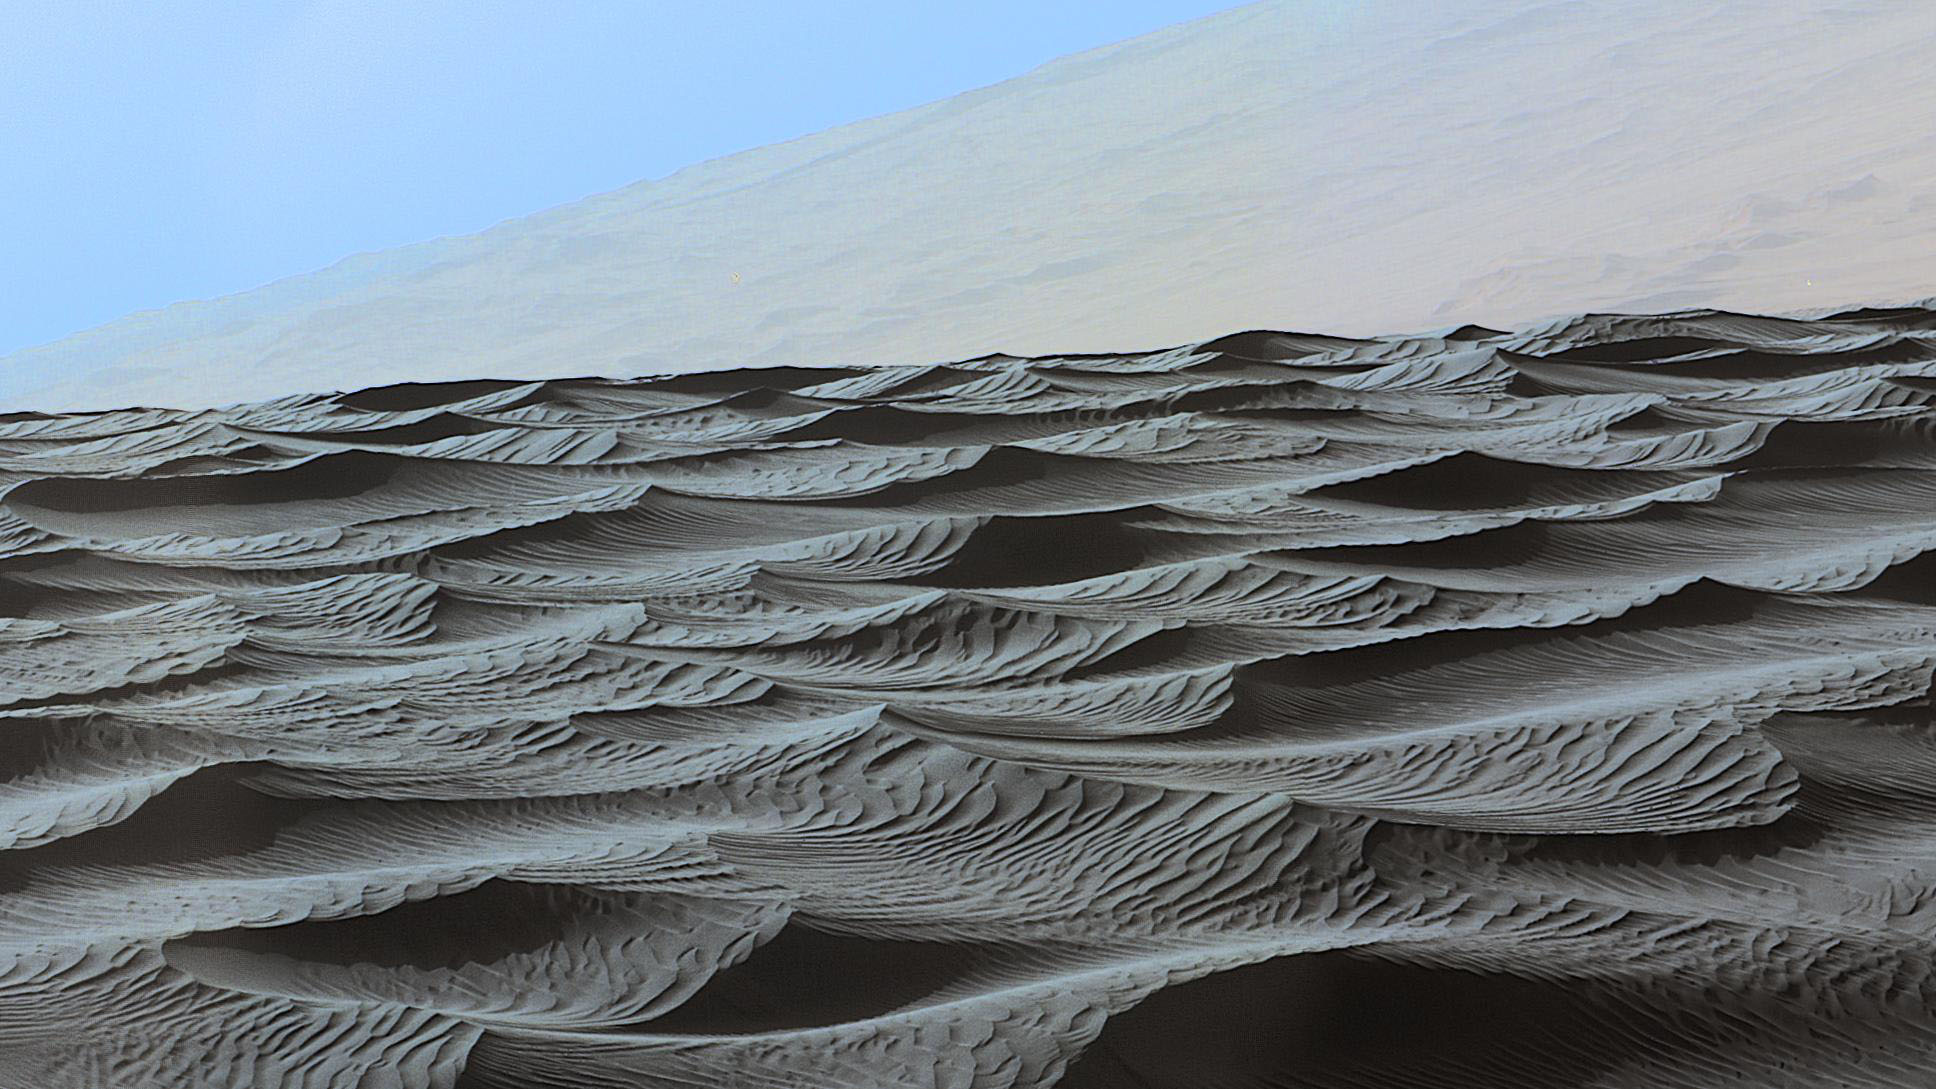 Two sizes of ripples are evident in this view of a top of a Martian sand dune, from NASA's Curiosity Mars rover from Dec. 13, 2015.